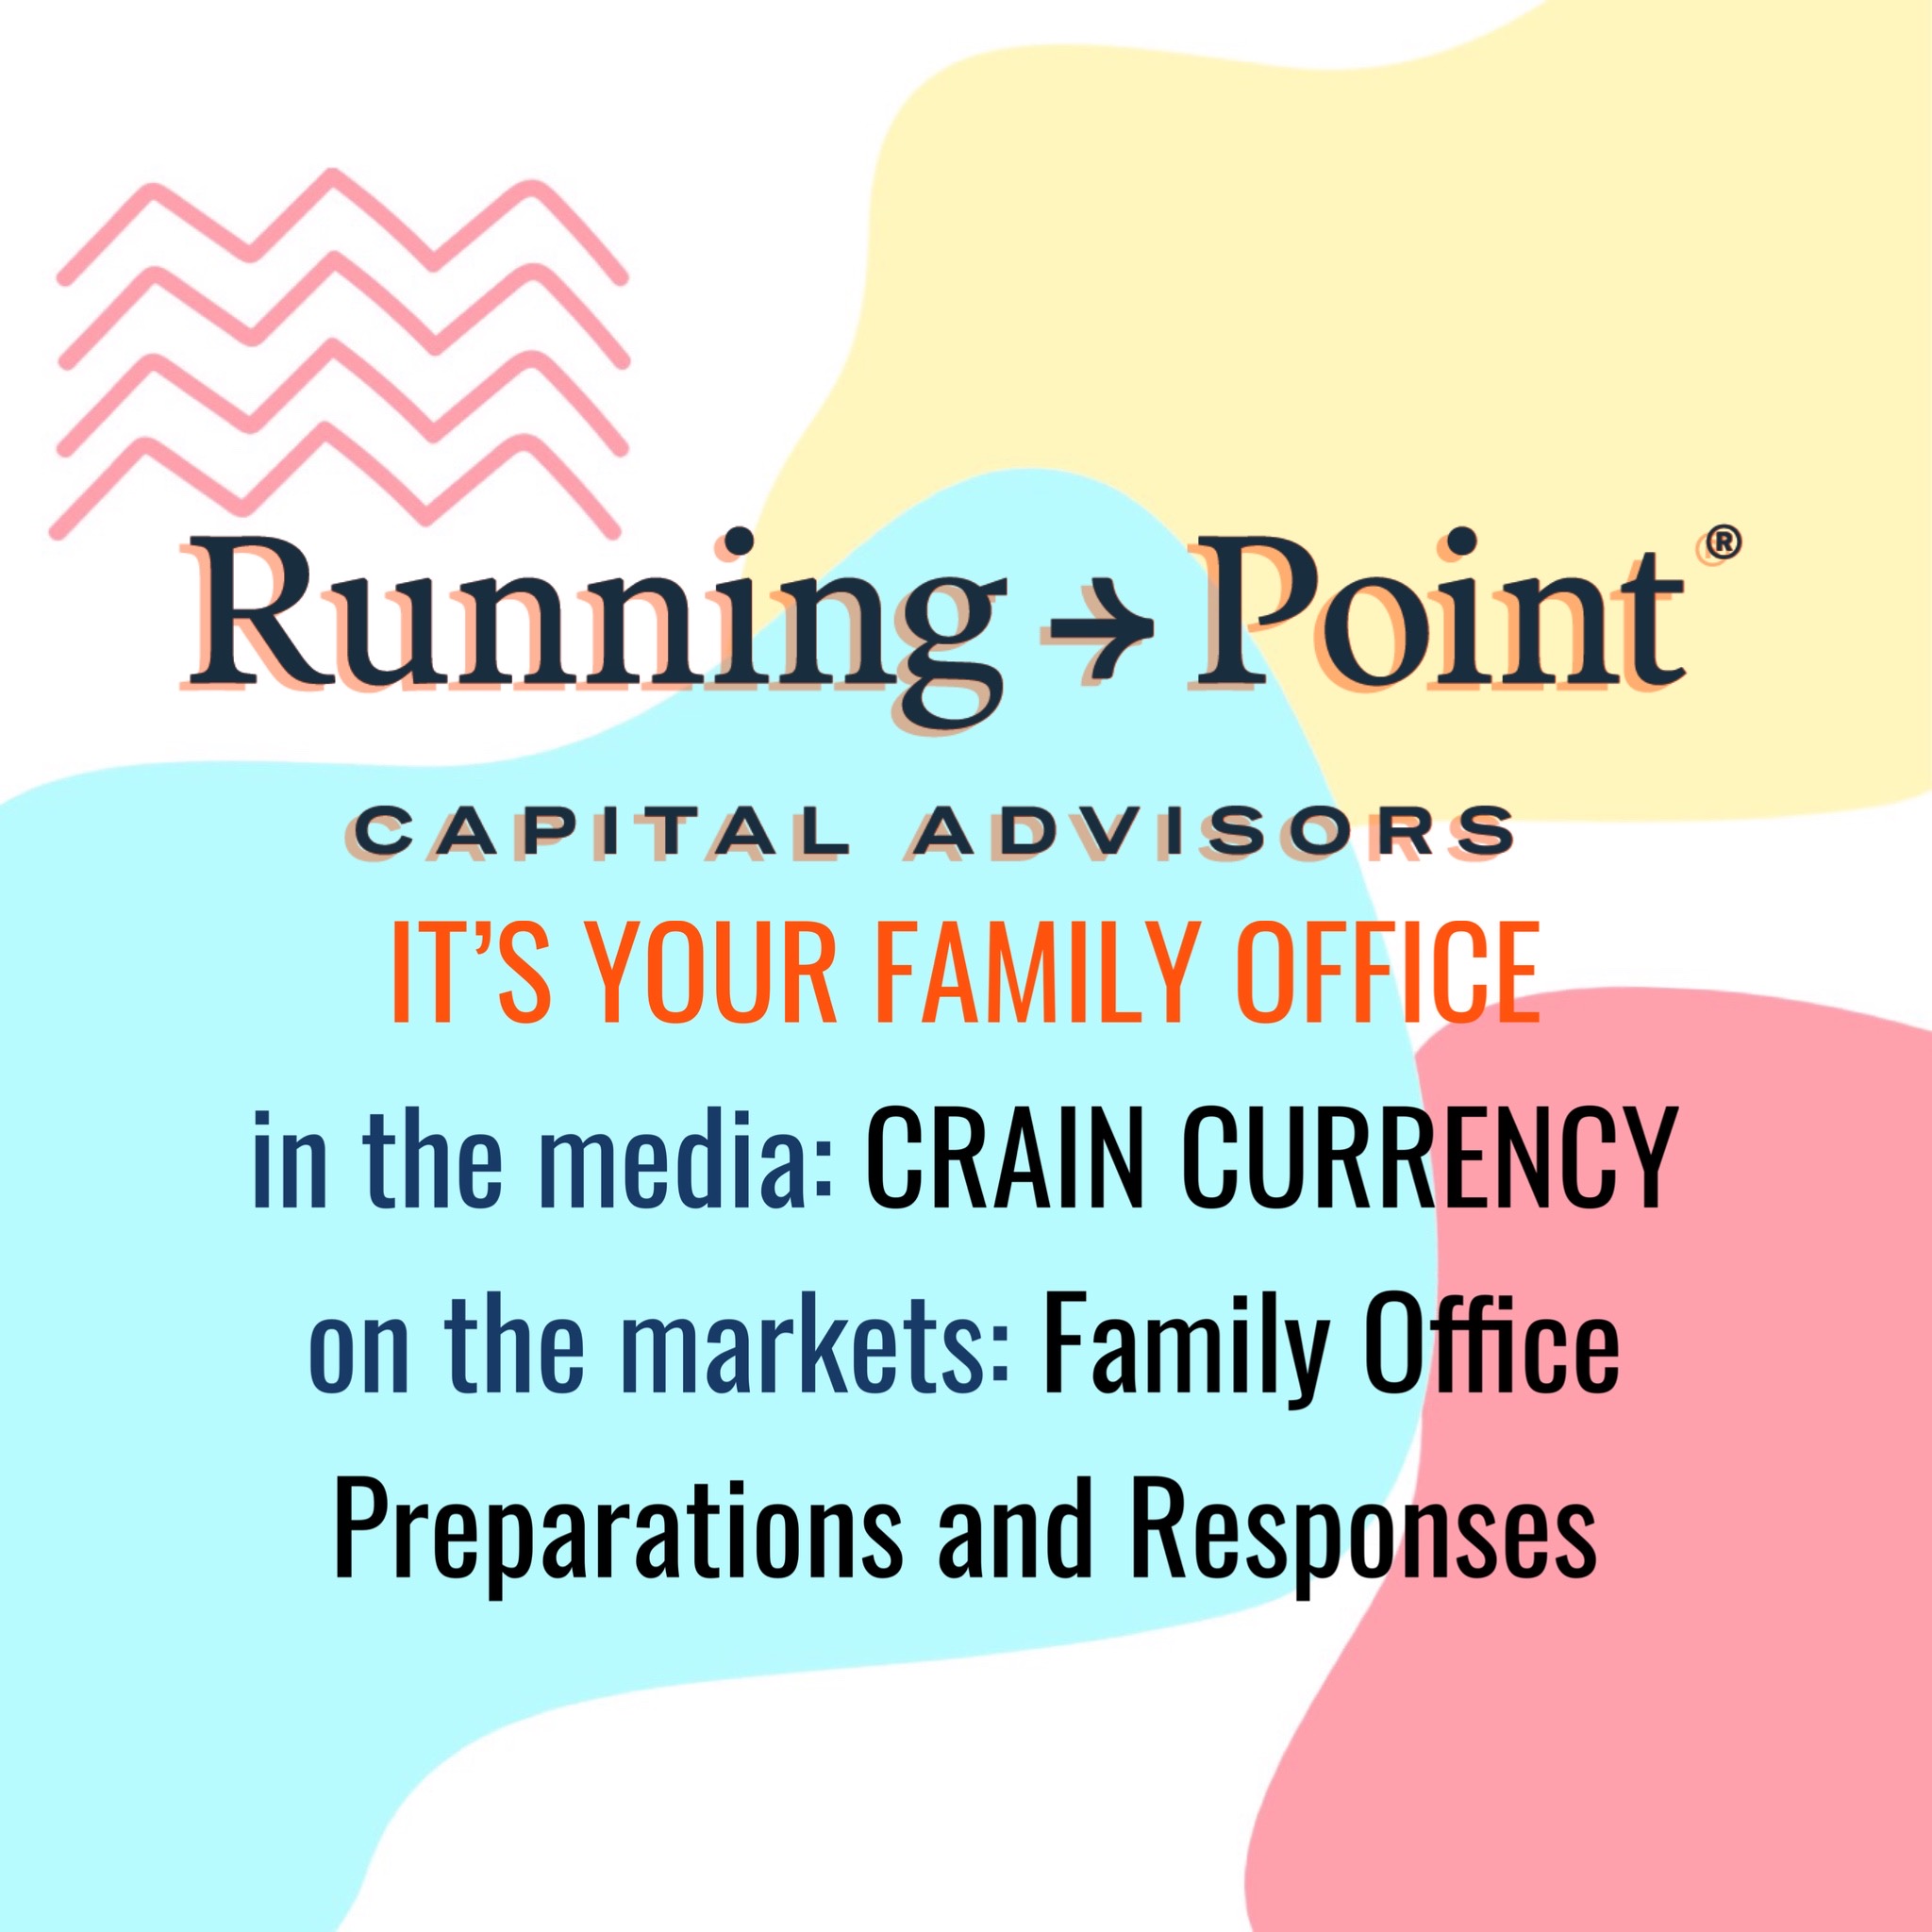 Crain Currency: Family Office Preparations and Responses